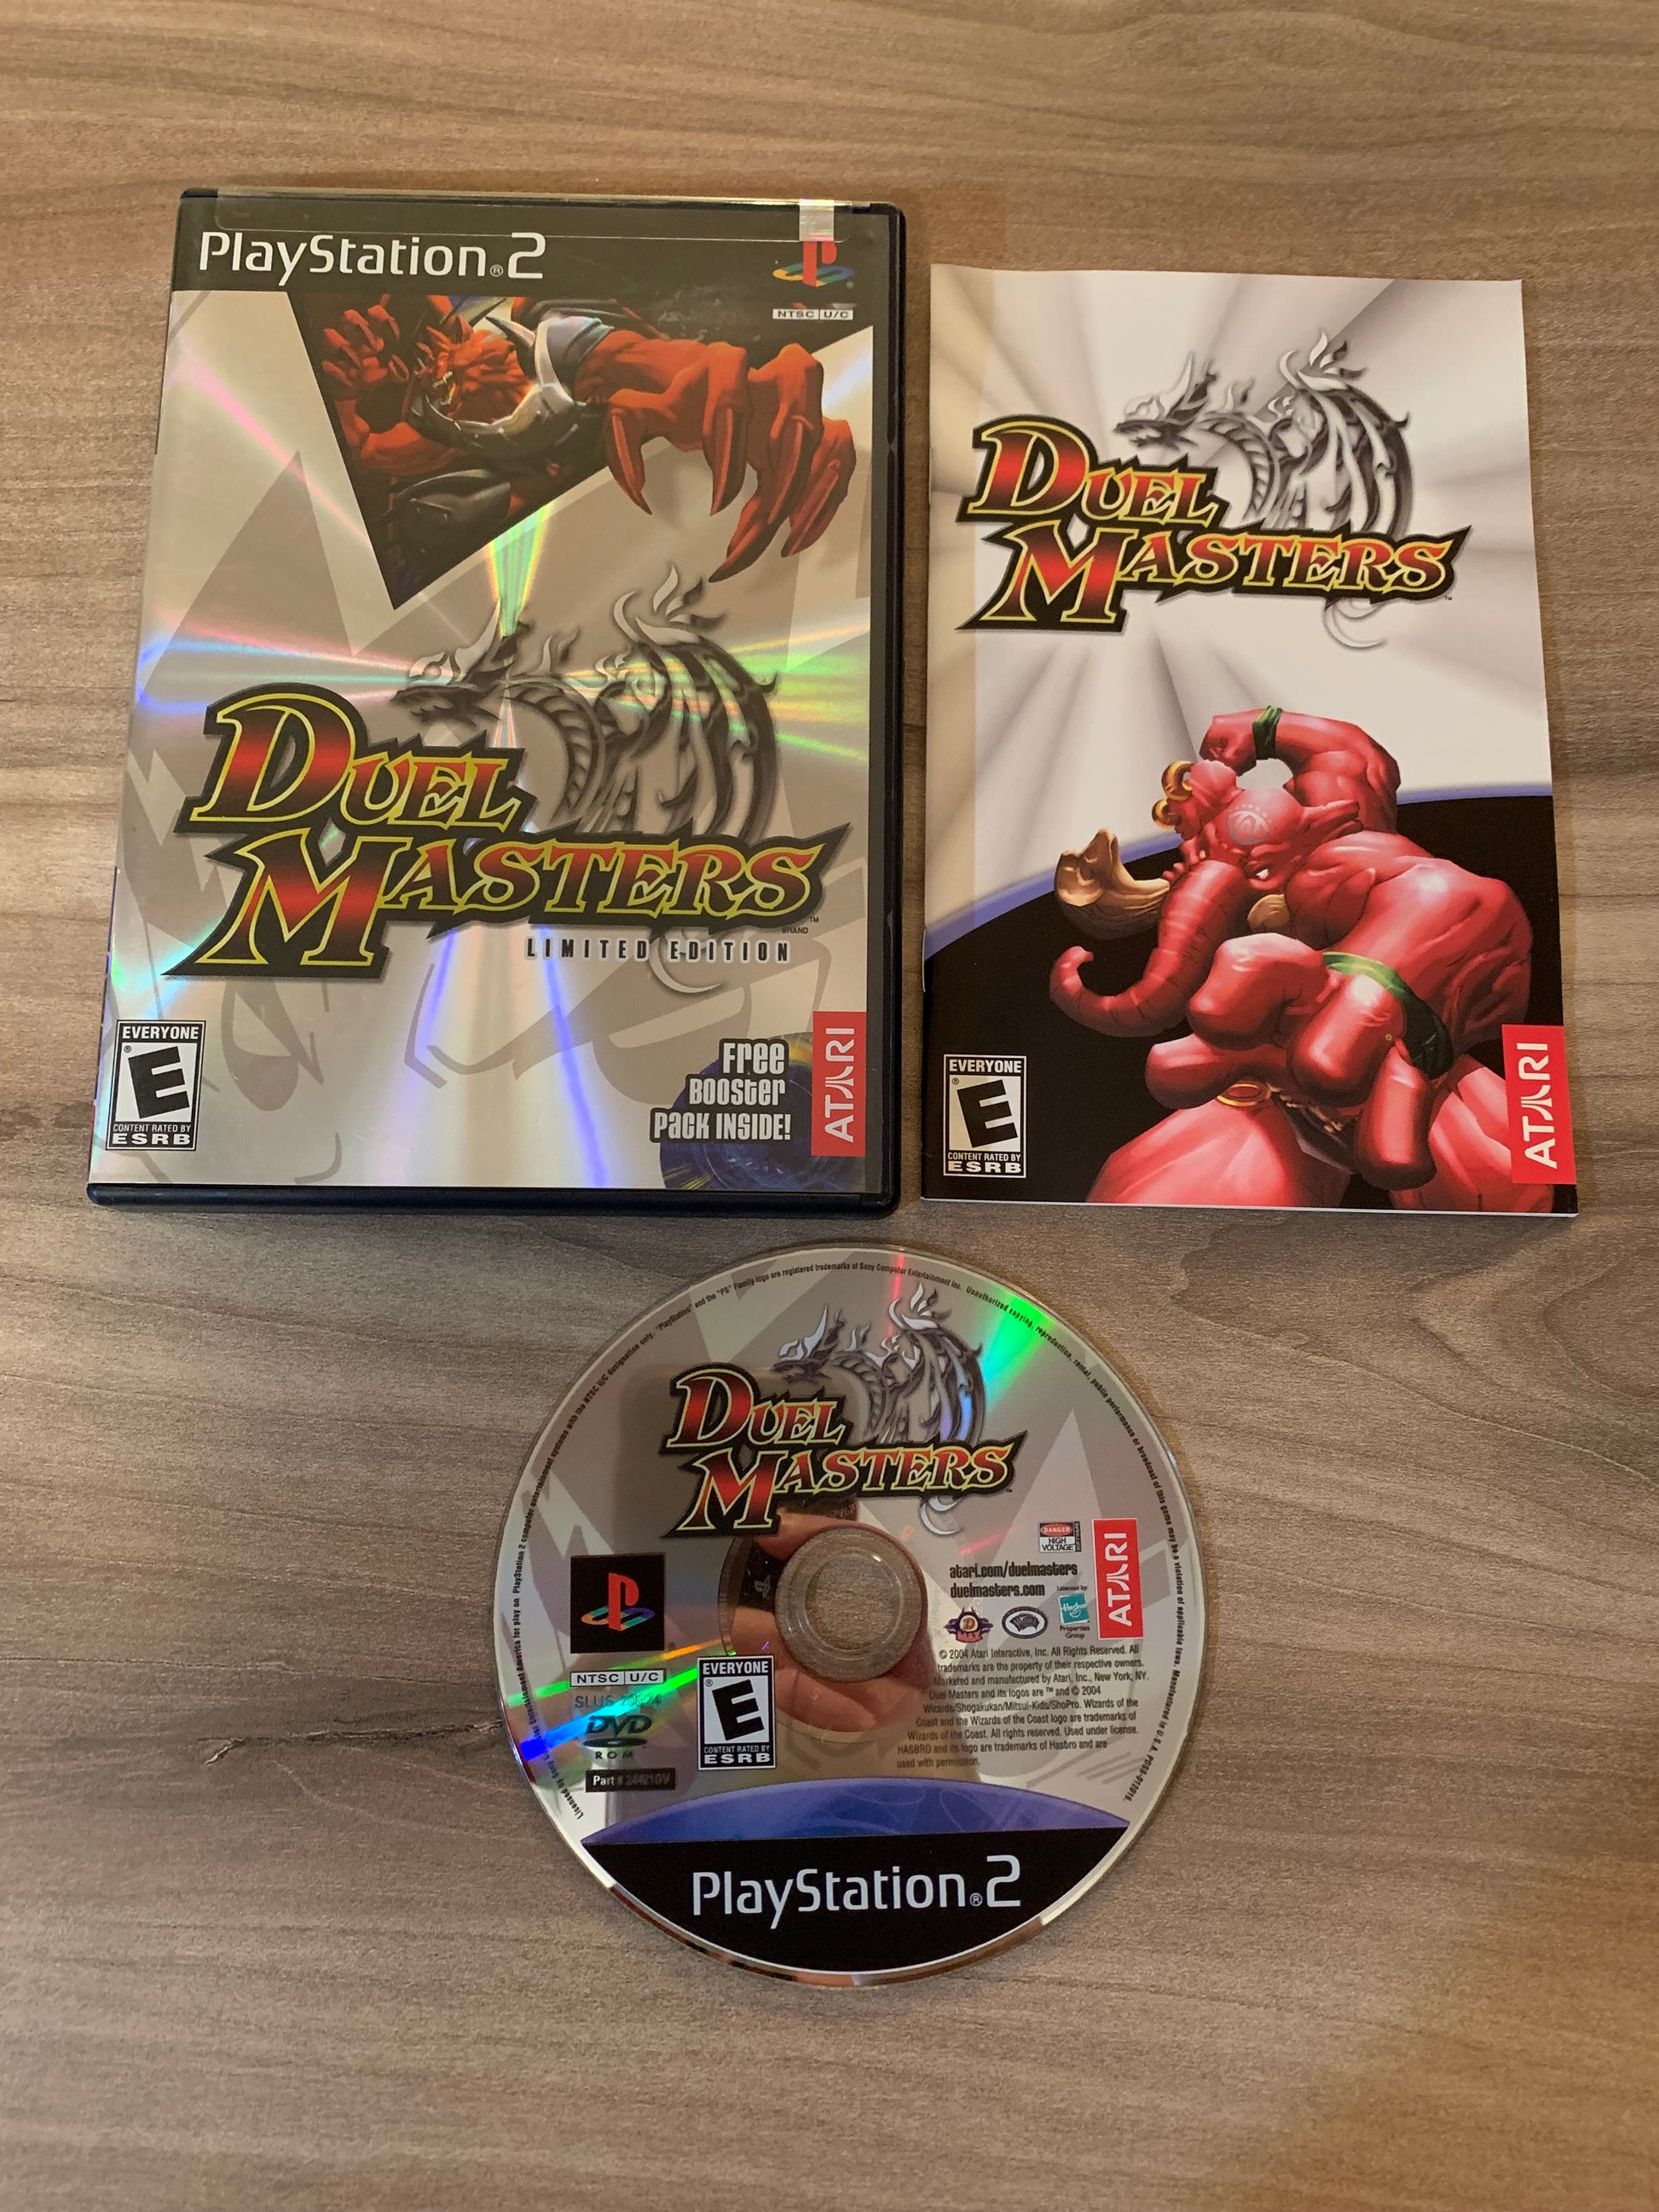 PiXEL-RETRO.COM : SONY PLAYSTATION 2 (PS2) COMPLET CIB BOX MANUAL GAME NTSC DUEL MASTERS LIMITED EDITION